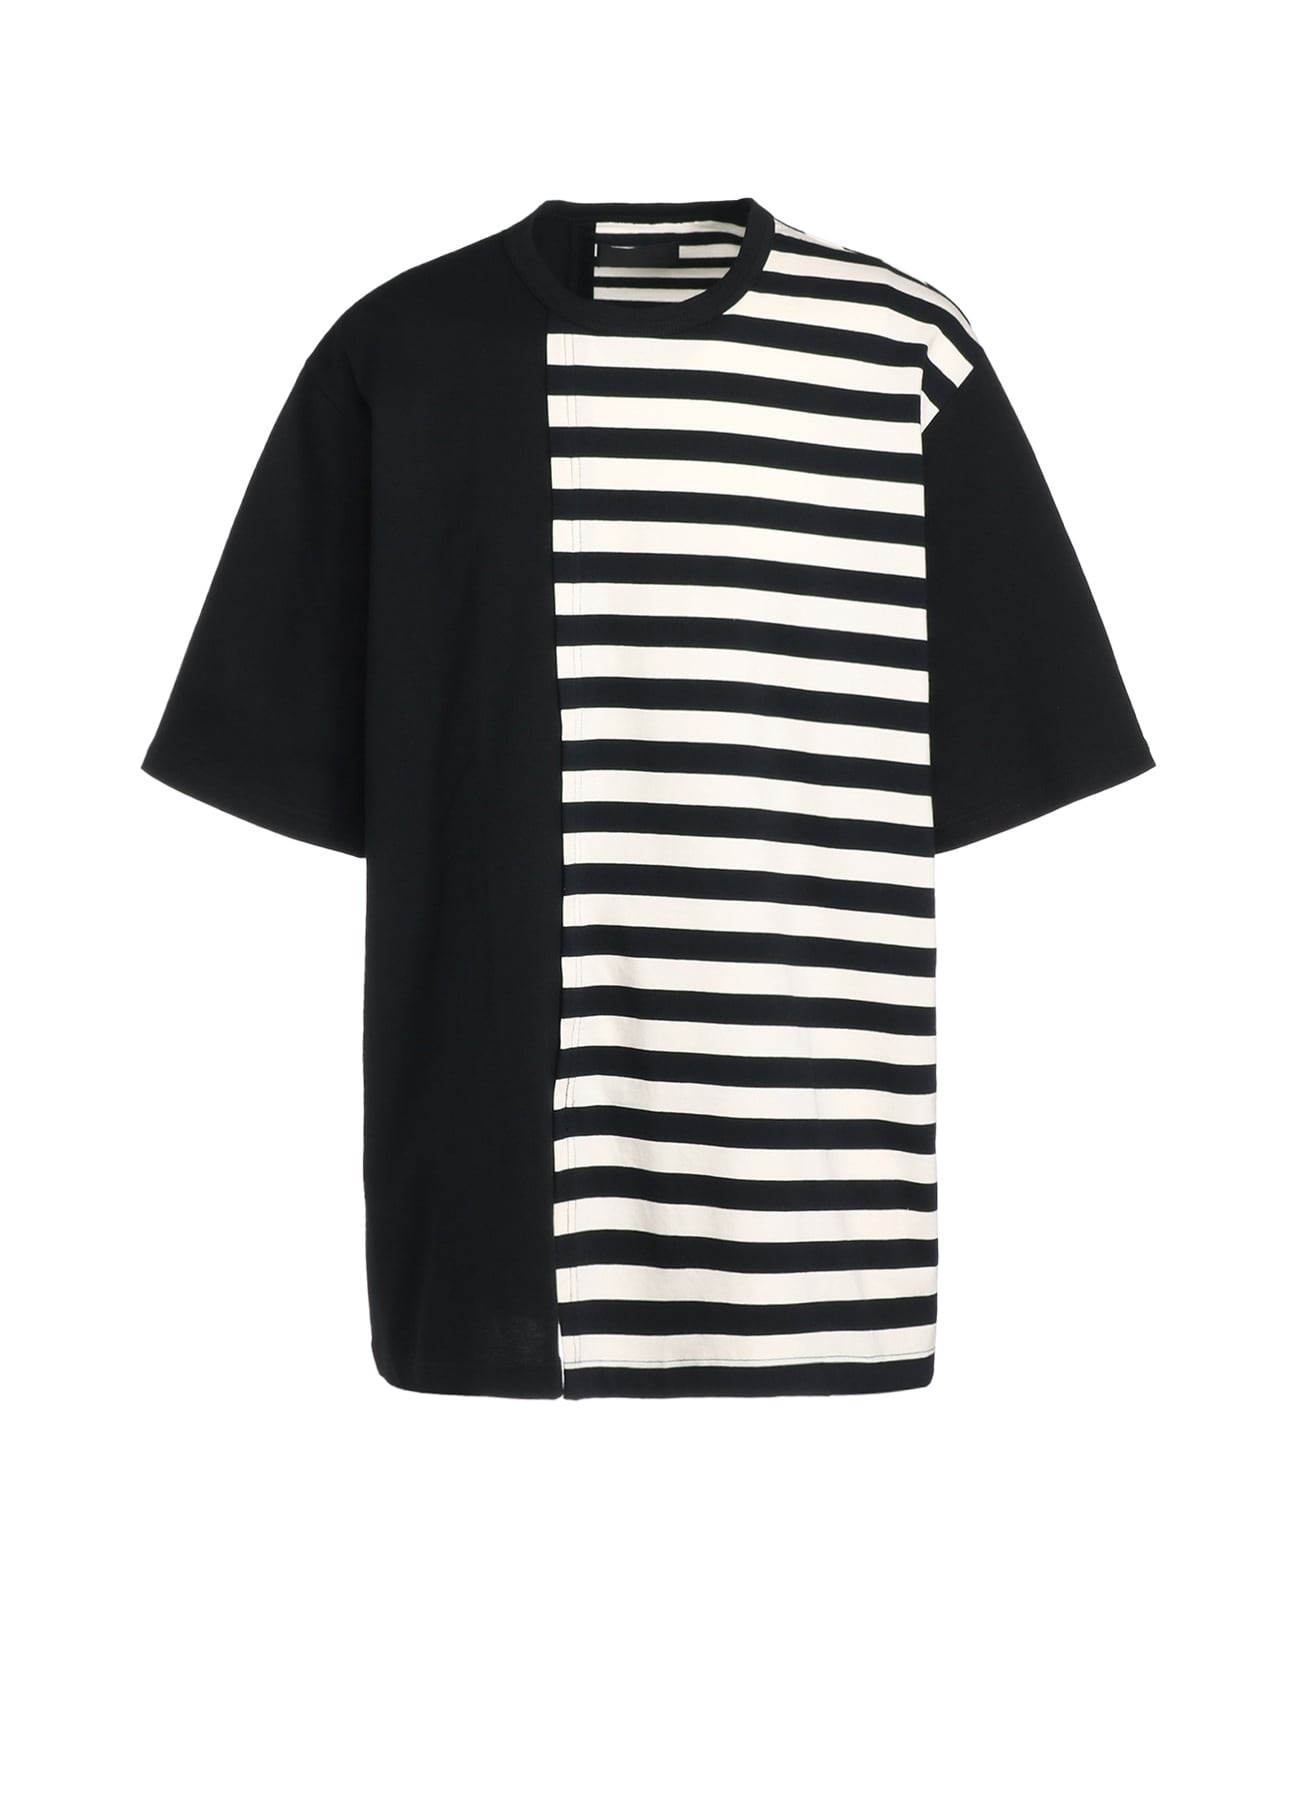 COTTON JERSEY FUSED STRIPE GRAFTED T-SHIRT(M BeigexBlack): S'YTE 